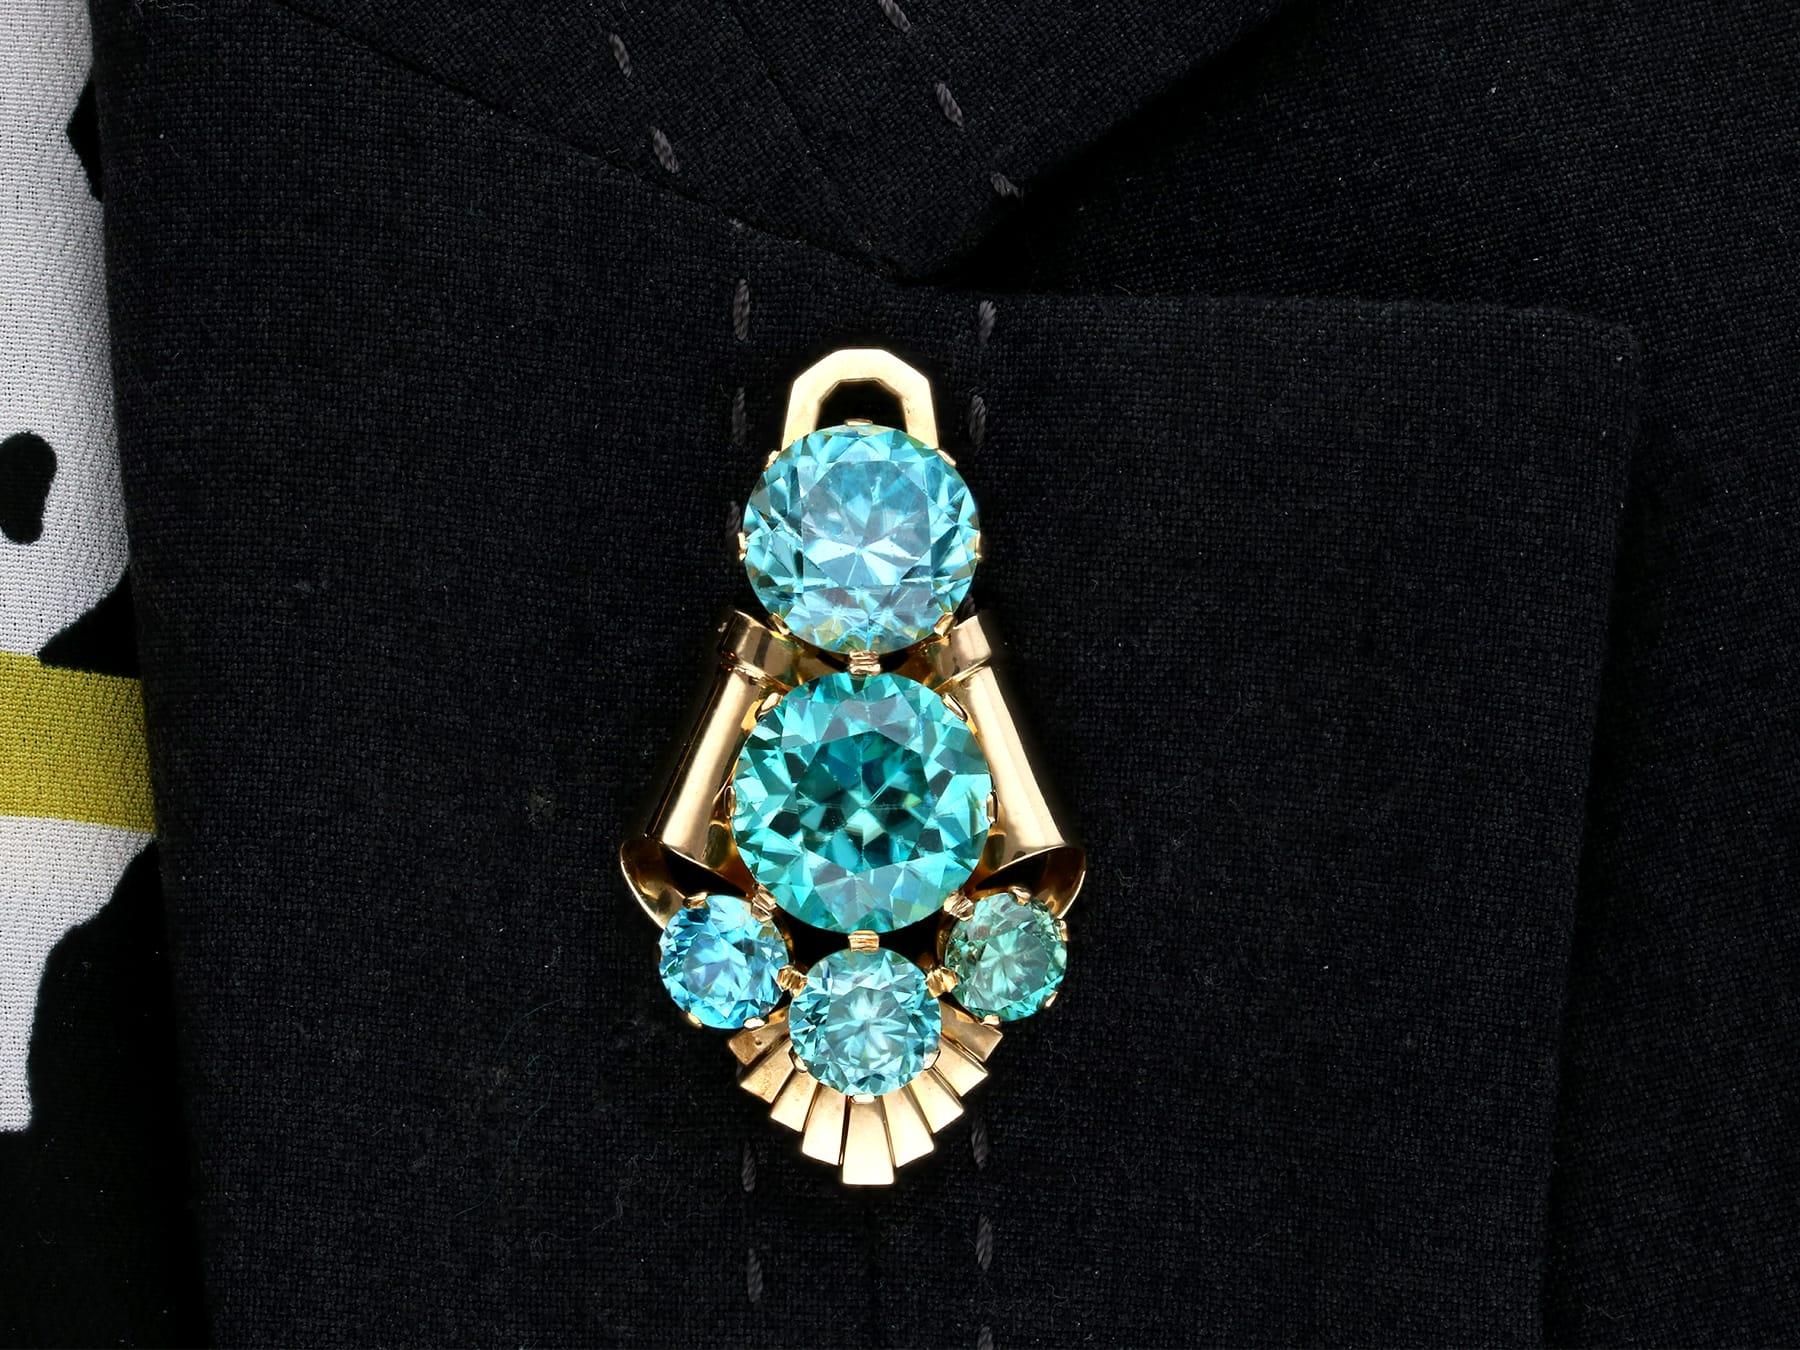 1940s Vintage 34.92 Carat High Zircon and 9k Yellow Gold Pendant / Brooch For Sale 7